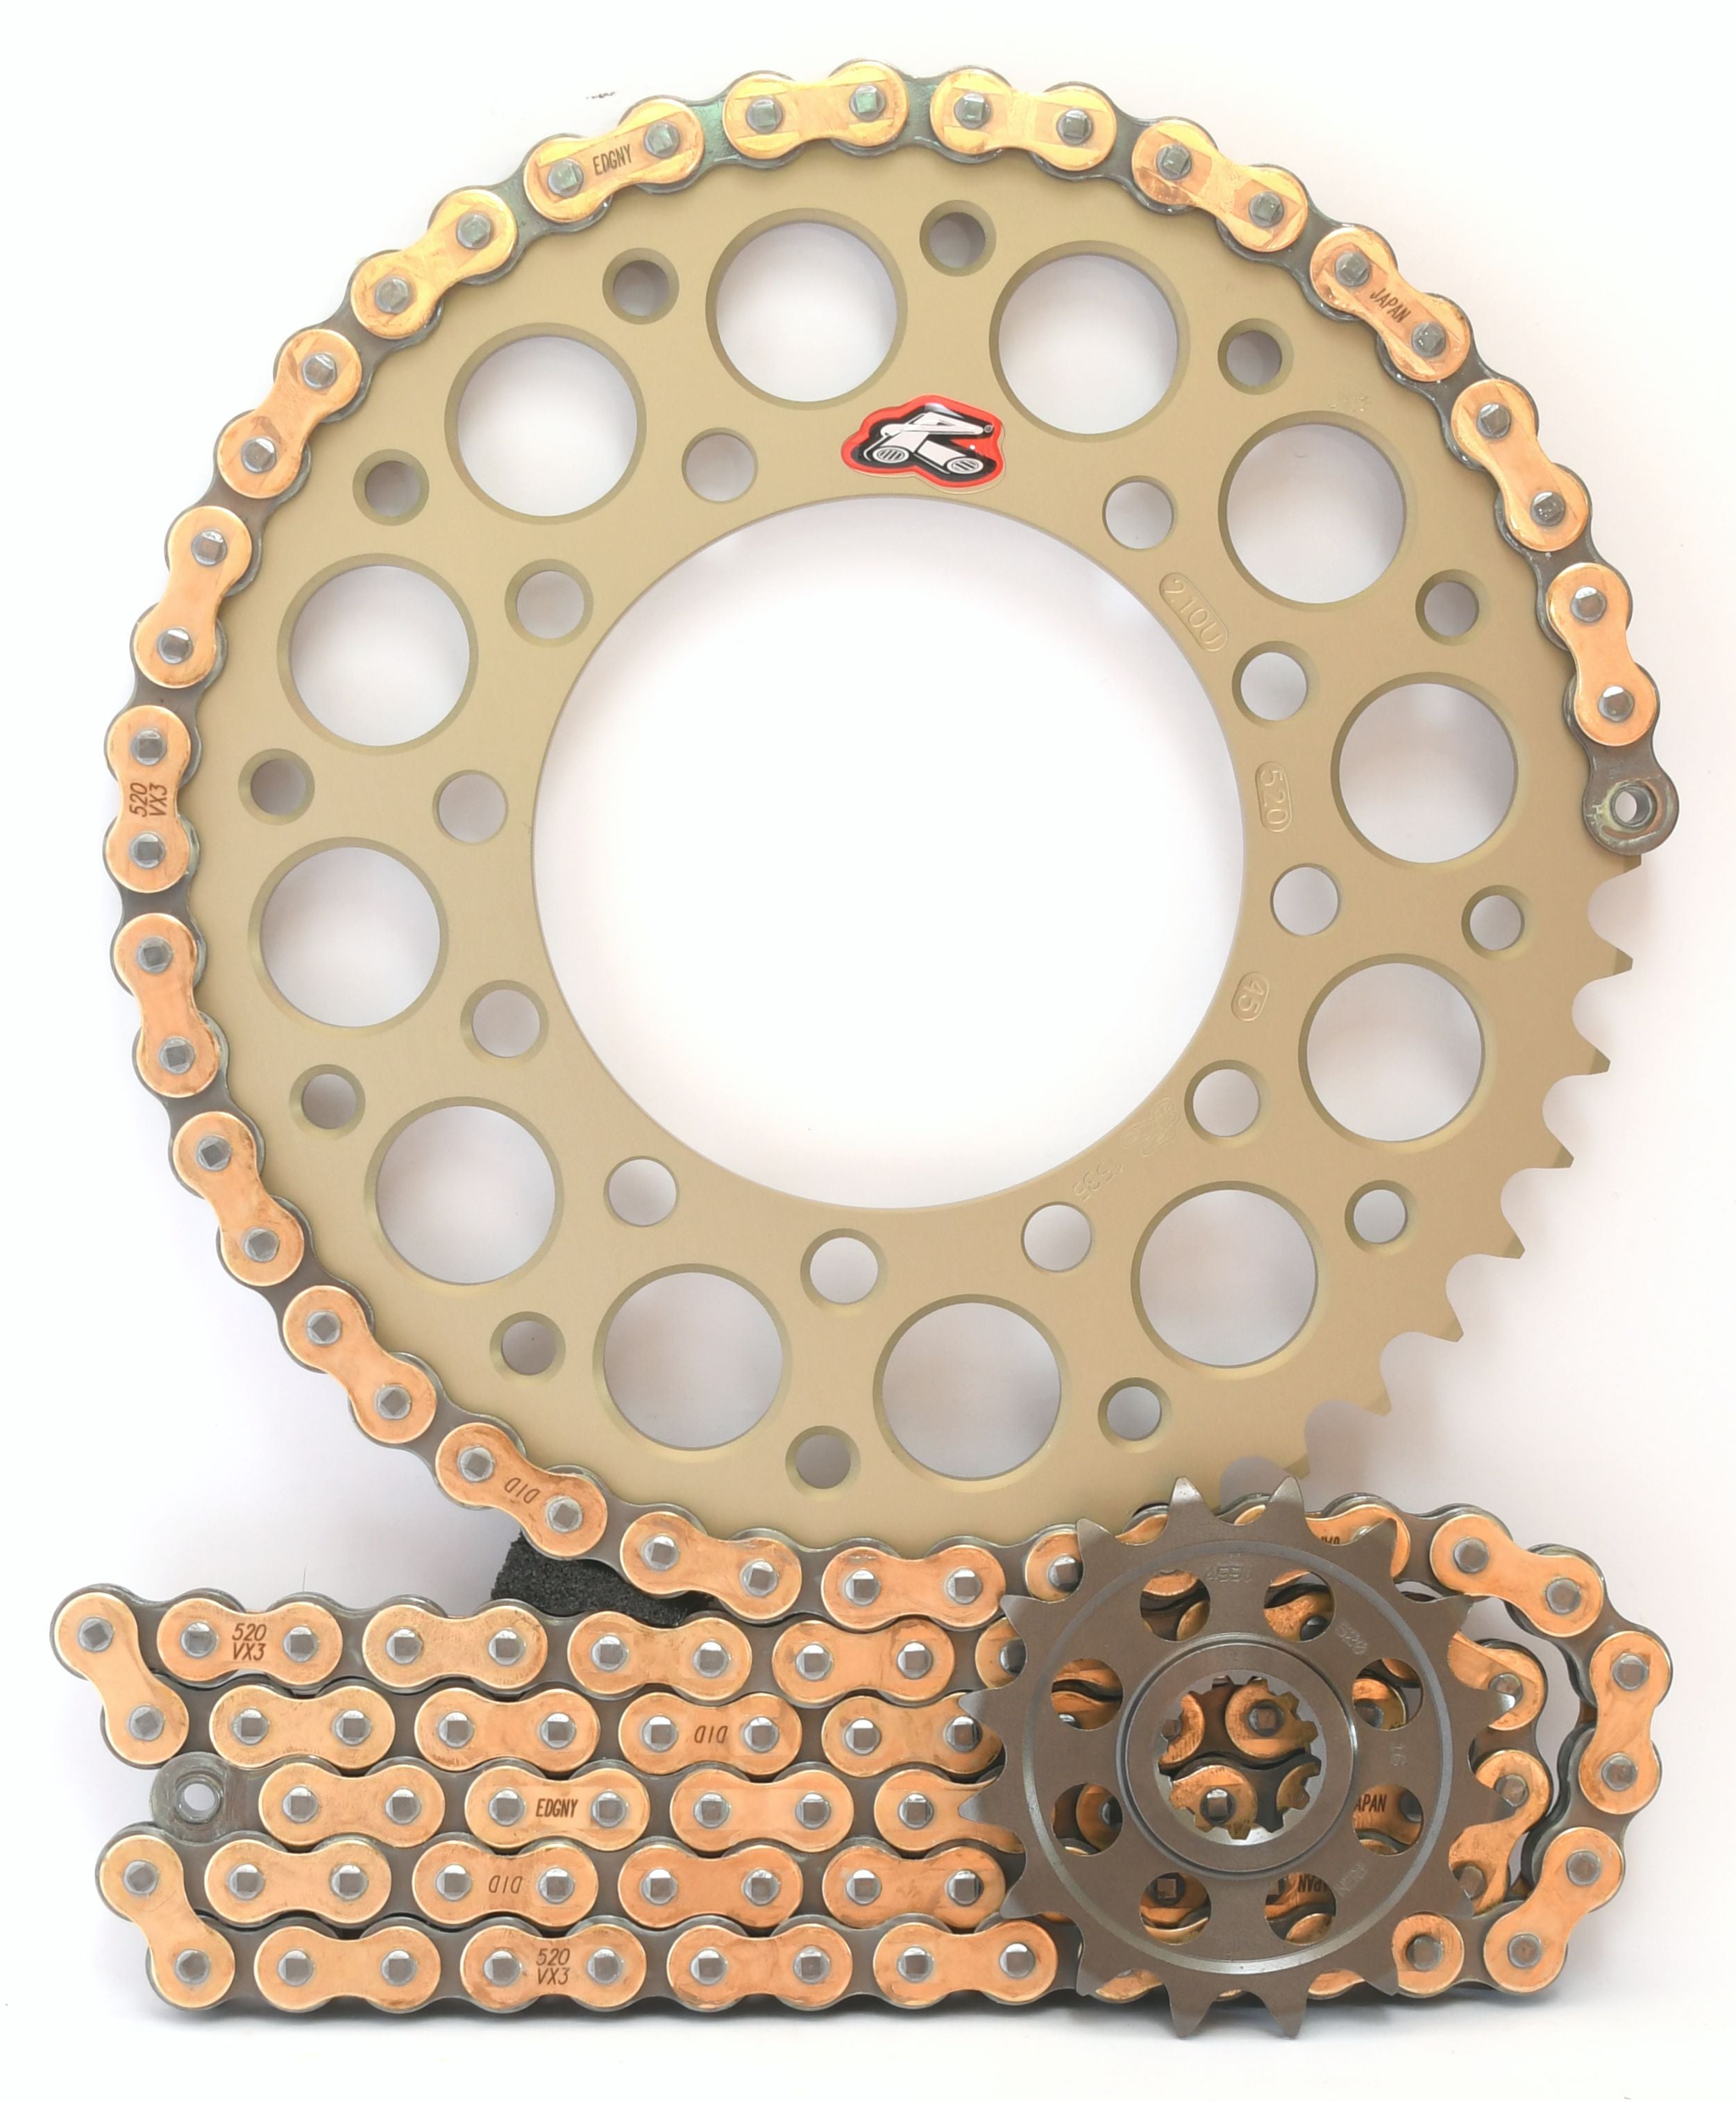 Renthal Ultralight and DID Chain & Sprocket Kit for Yamaha R6 2003> - 520 Conversion - Choose Your Gearing